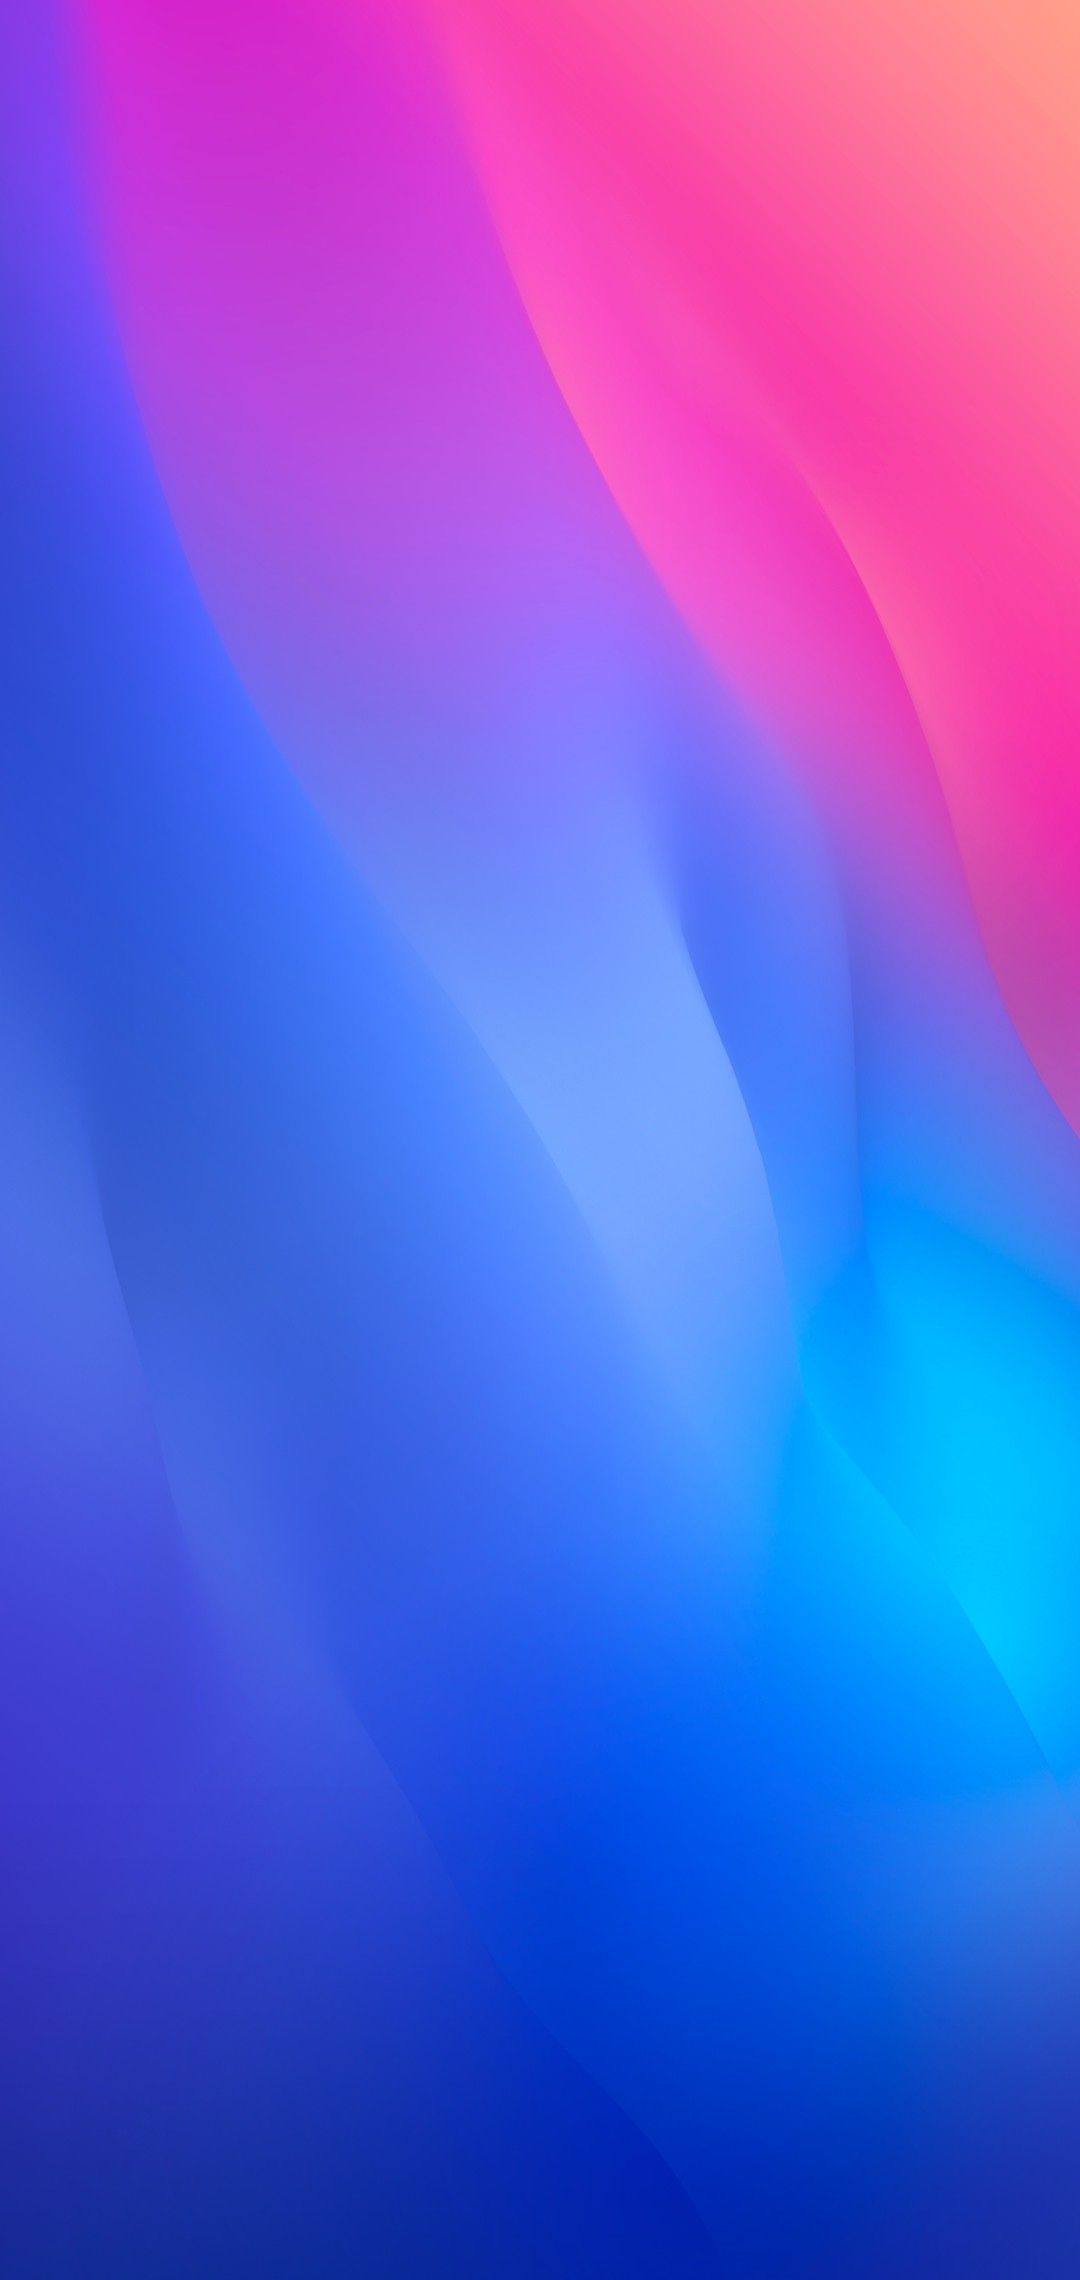 iOS iPhone X, blue, pink, clean, simple, abstract, apple